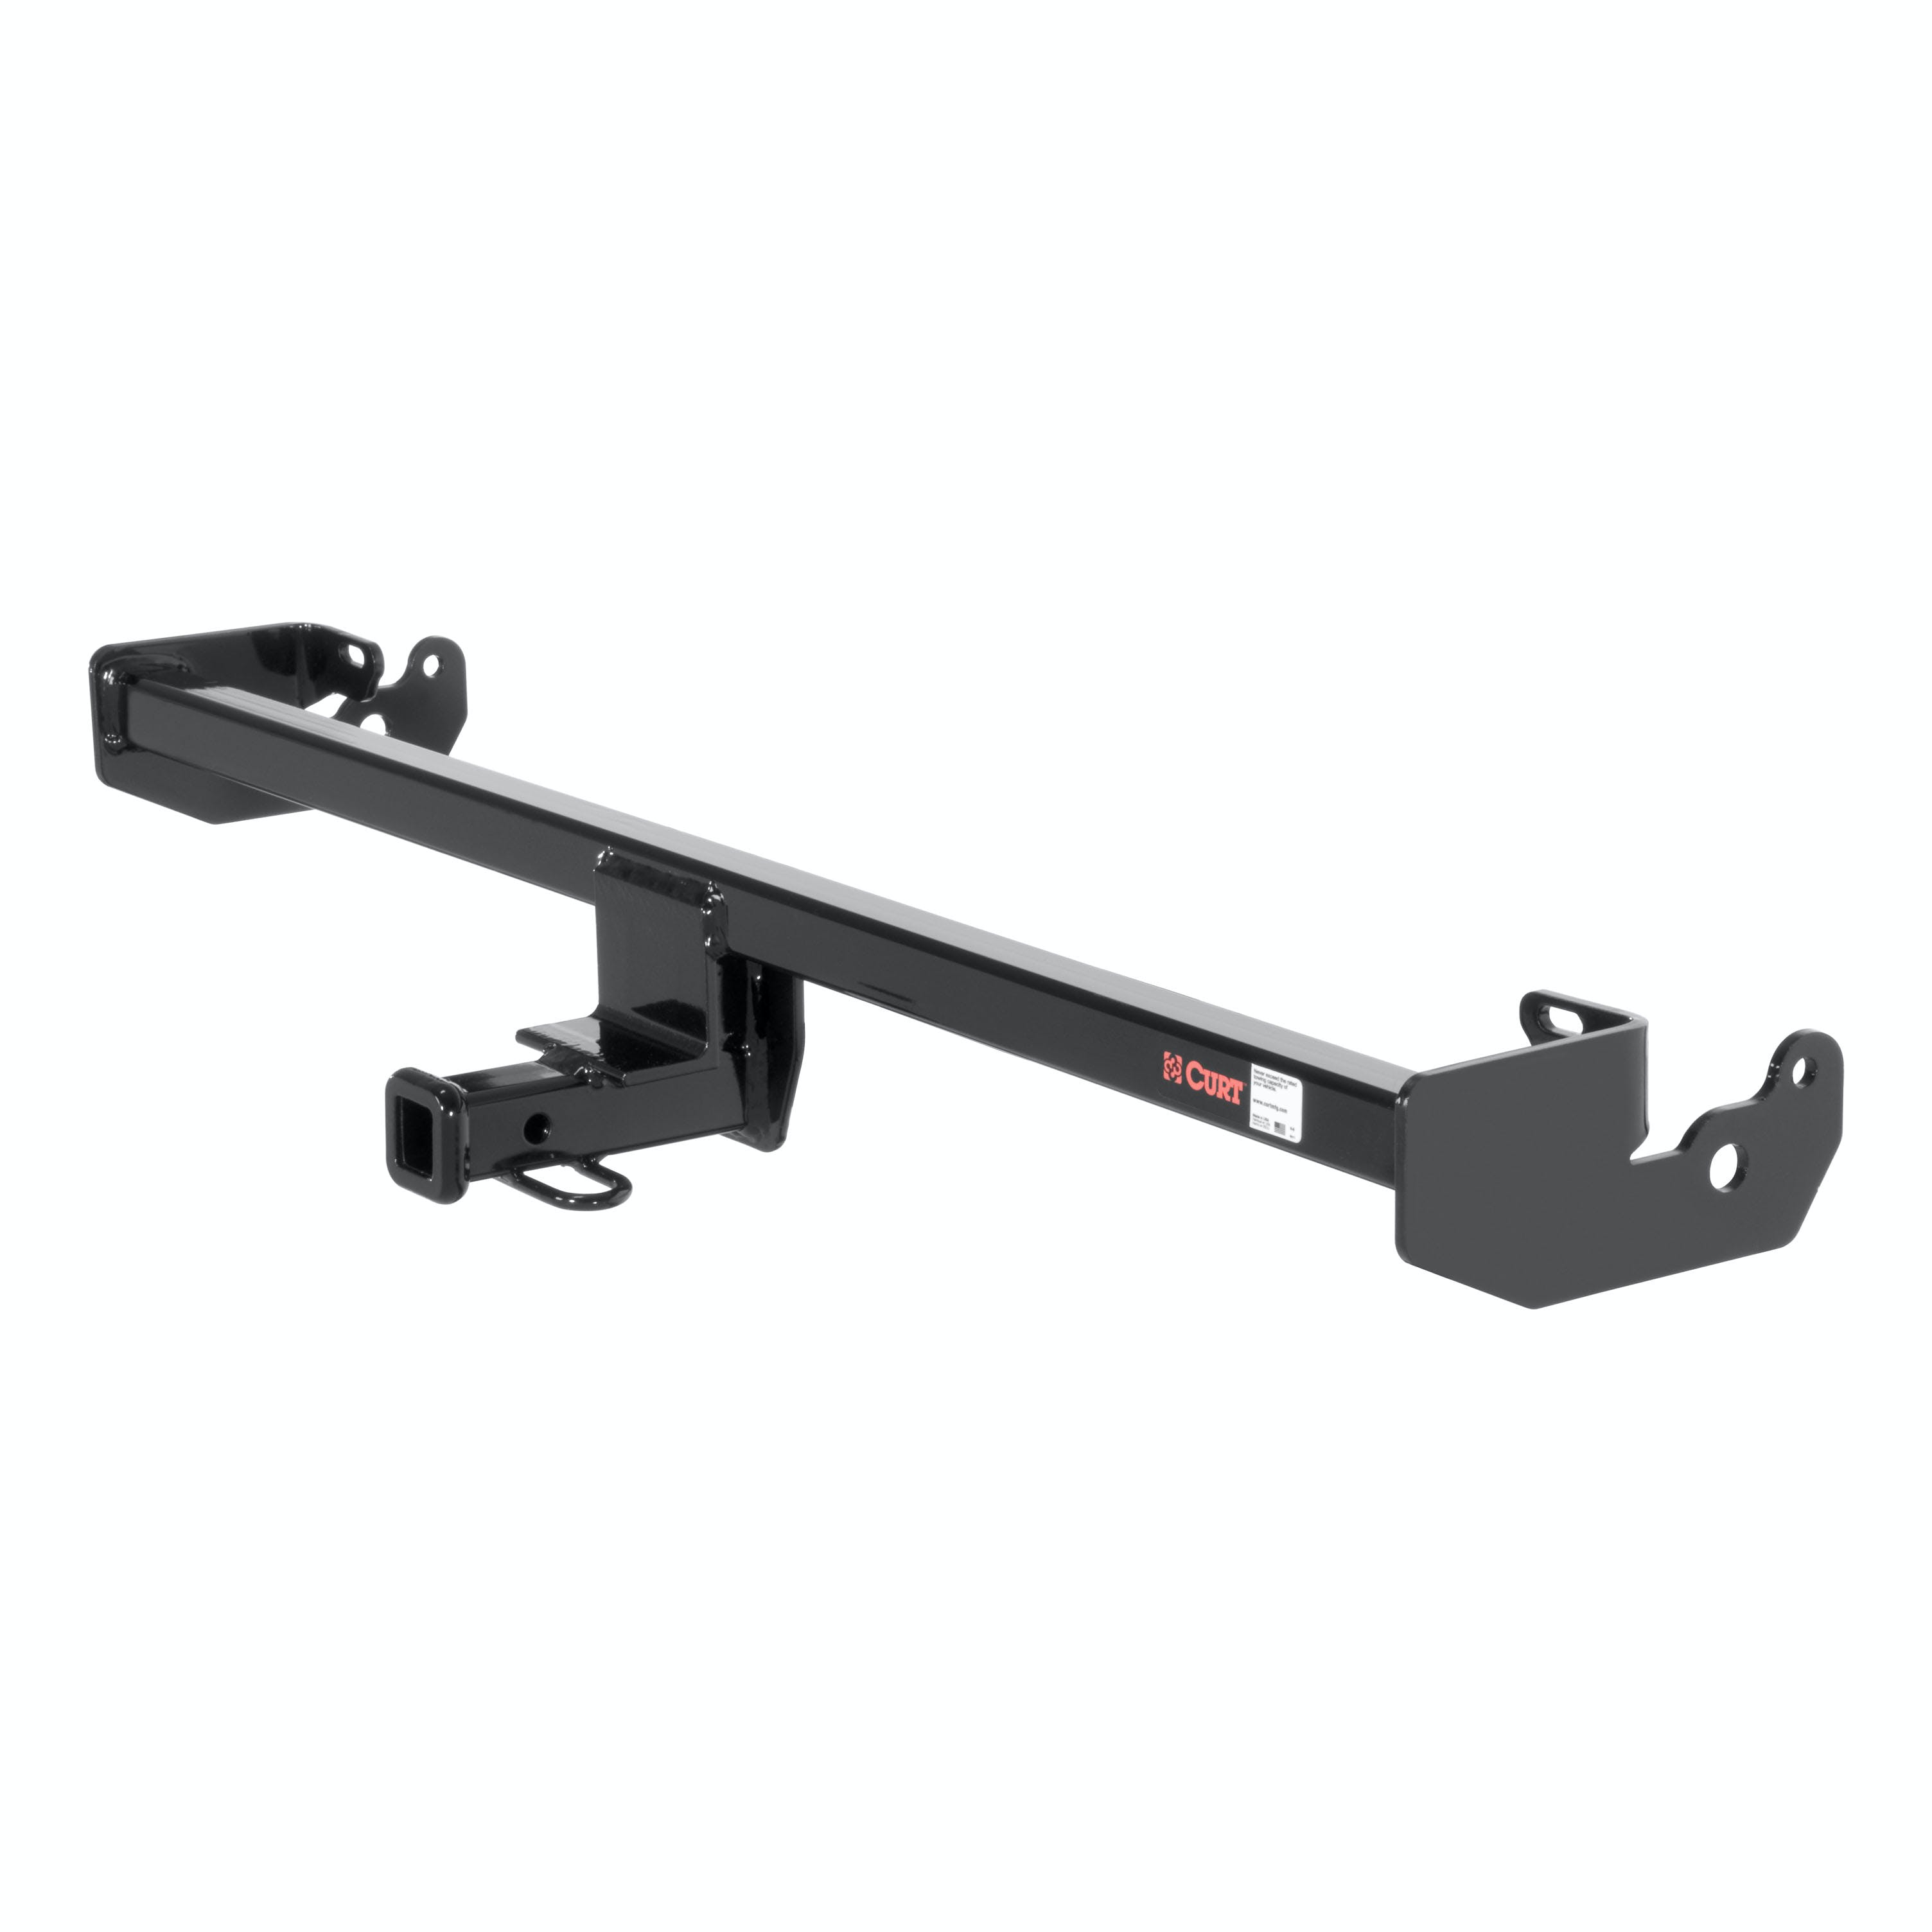 CURT 11134 Class 1 Trailer Hitch, 1-1/4 Receiver, Select Scion xD